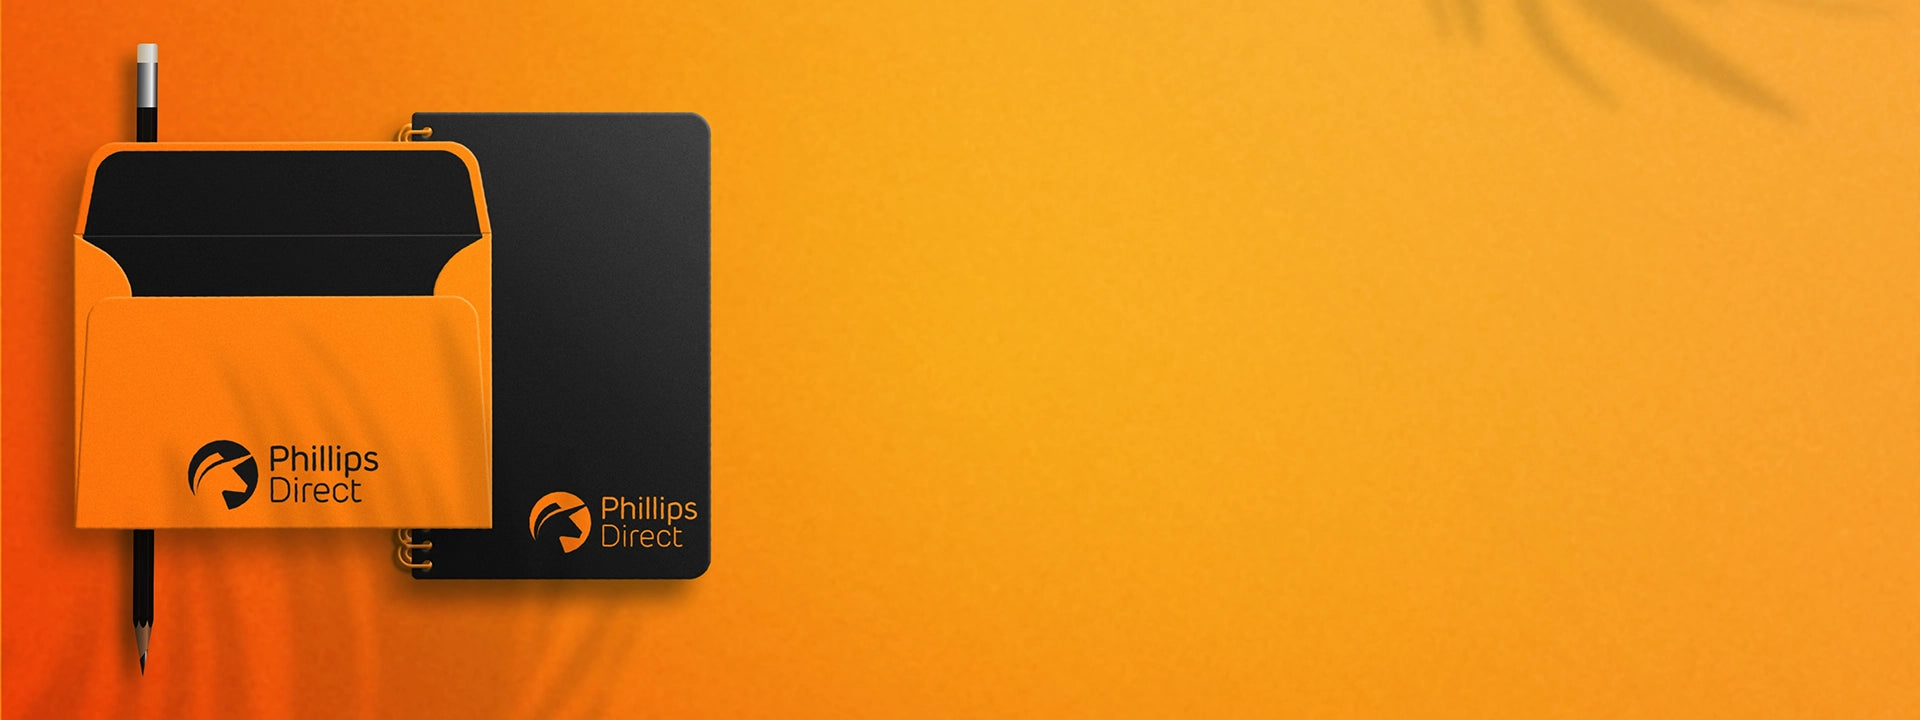 phillips direct custom stationary office supplies and packaging